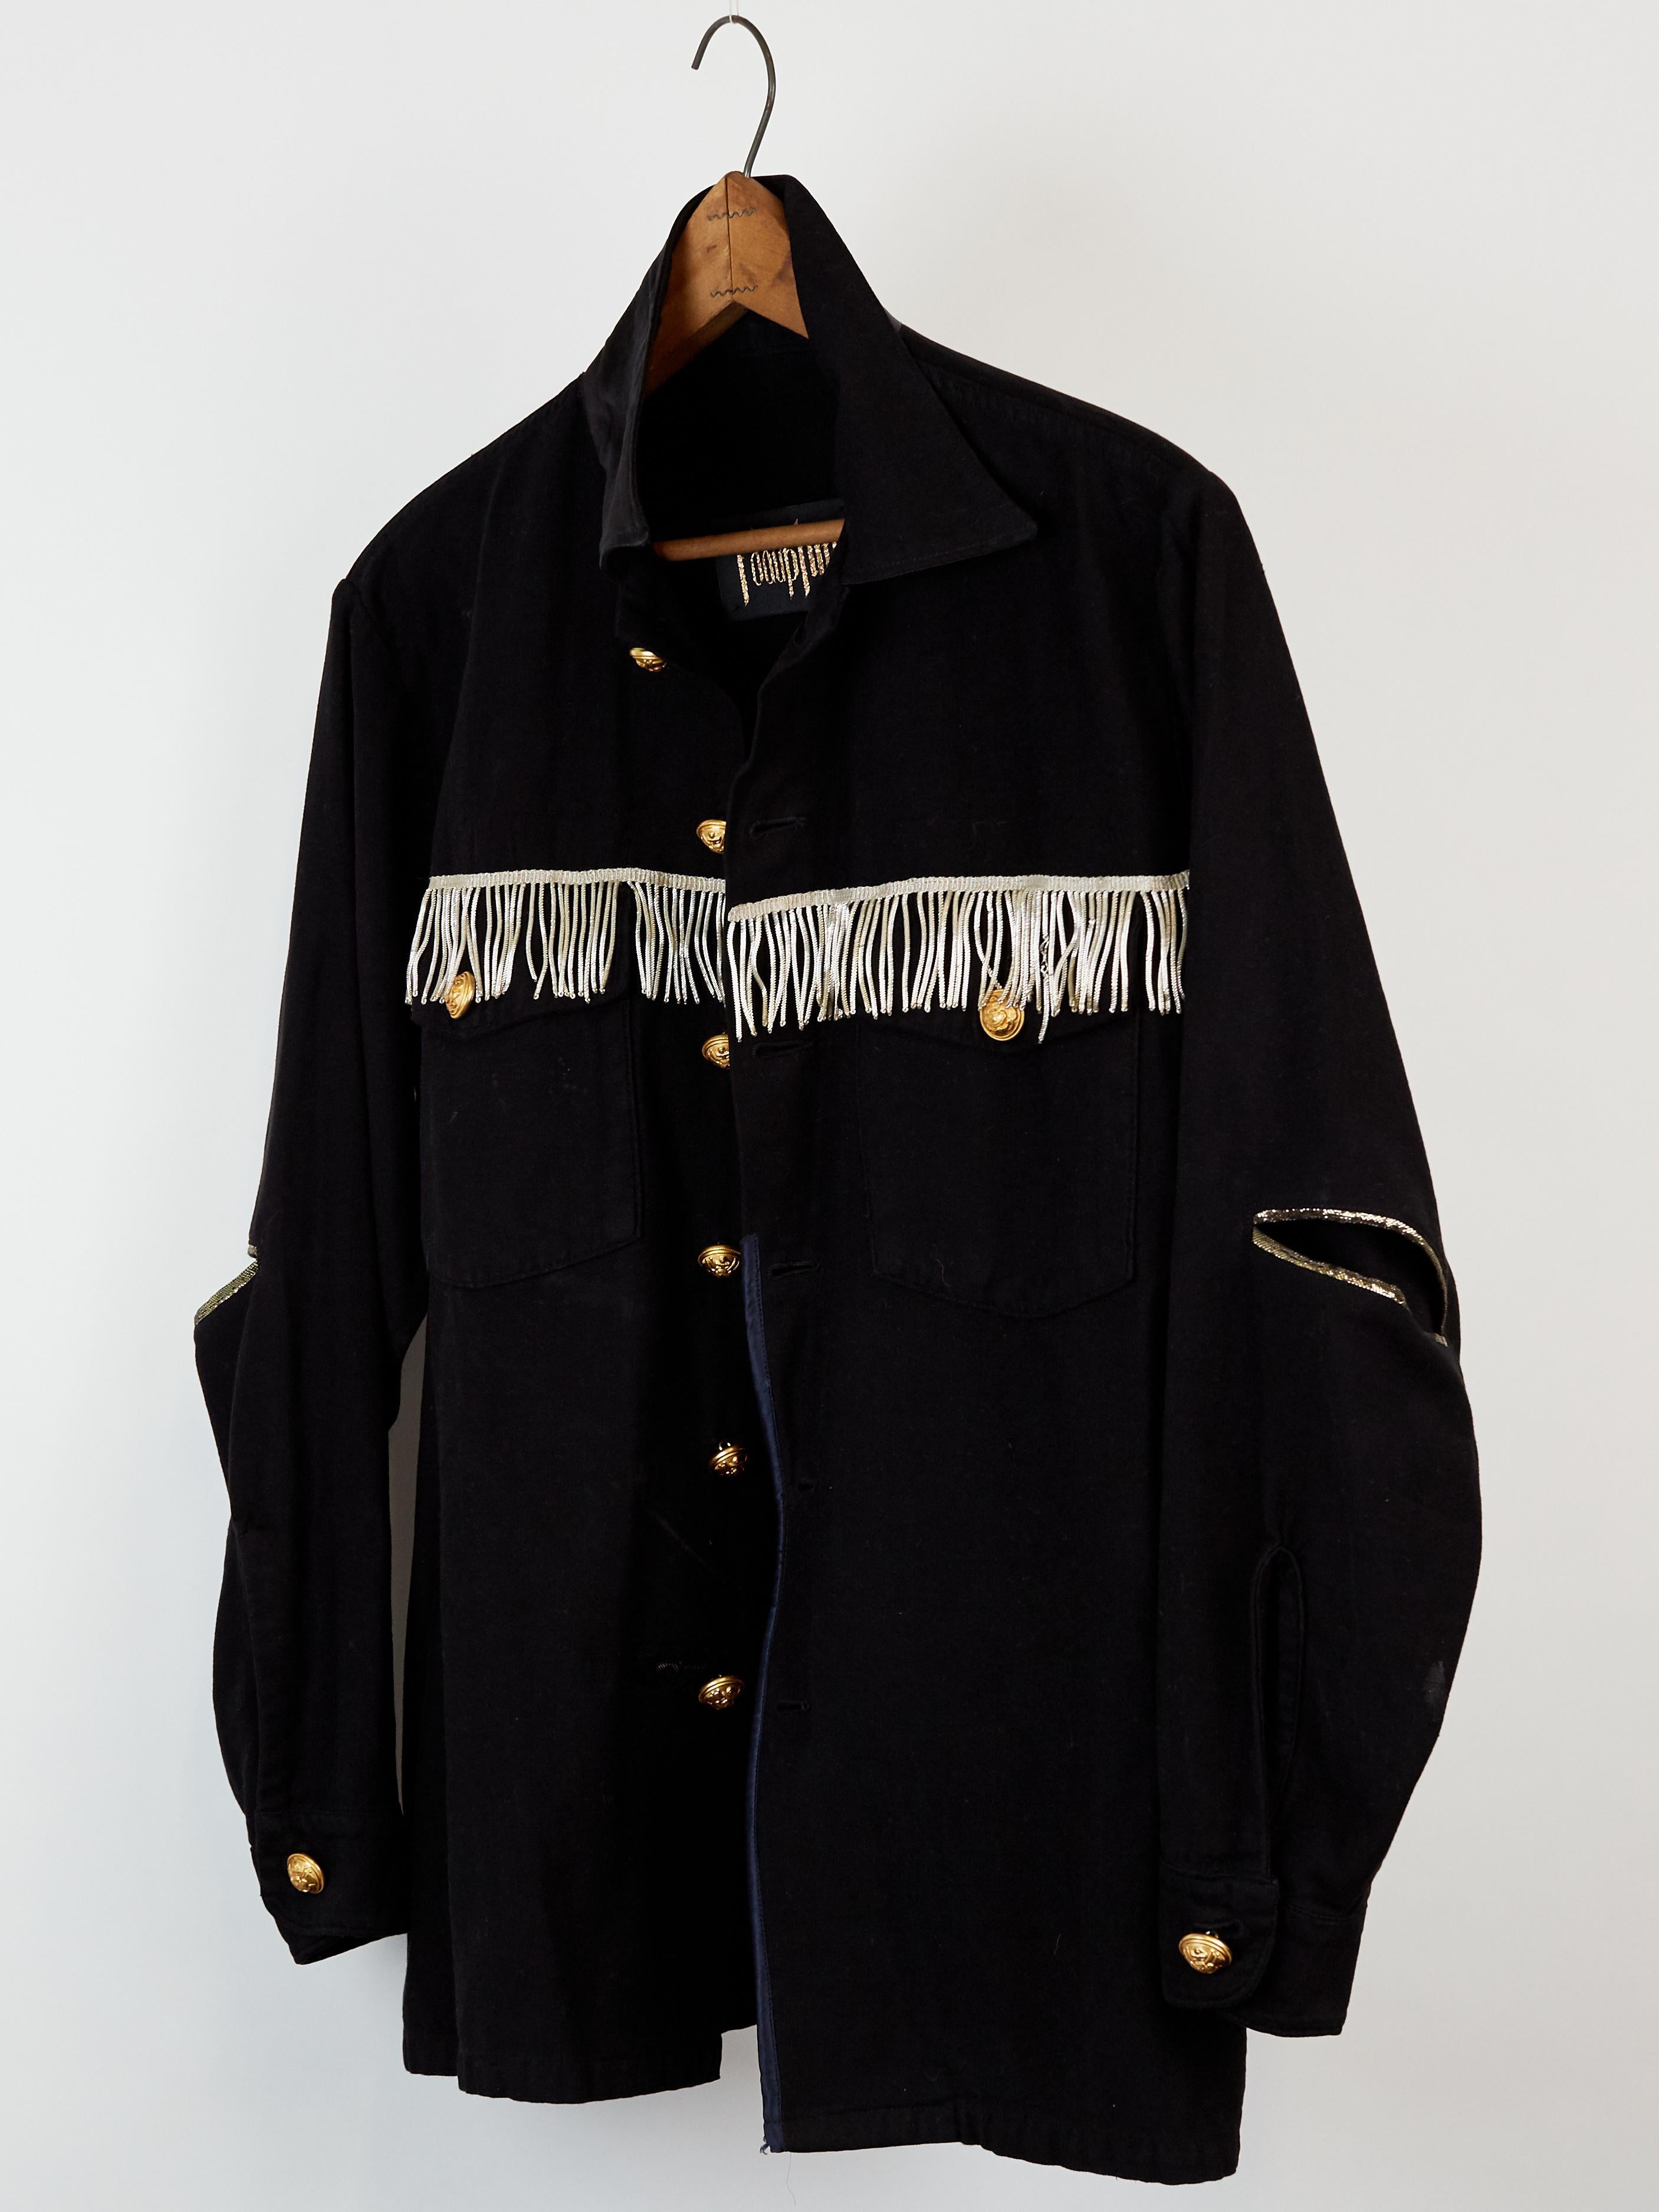 One of a kind Fringe Jacket Black Gold Buttons Open Elbow Gold J Dauphin 1